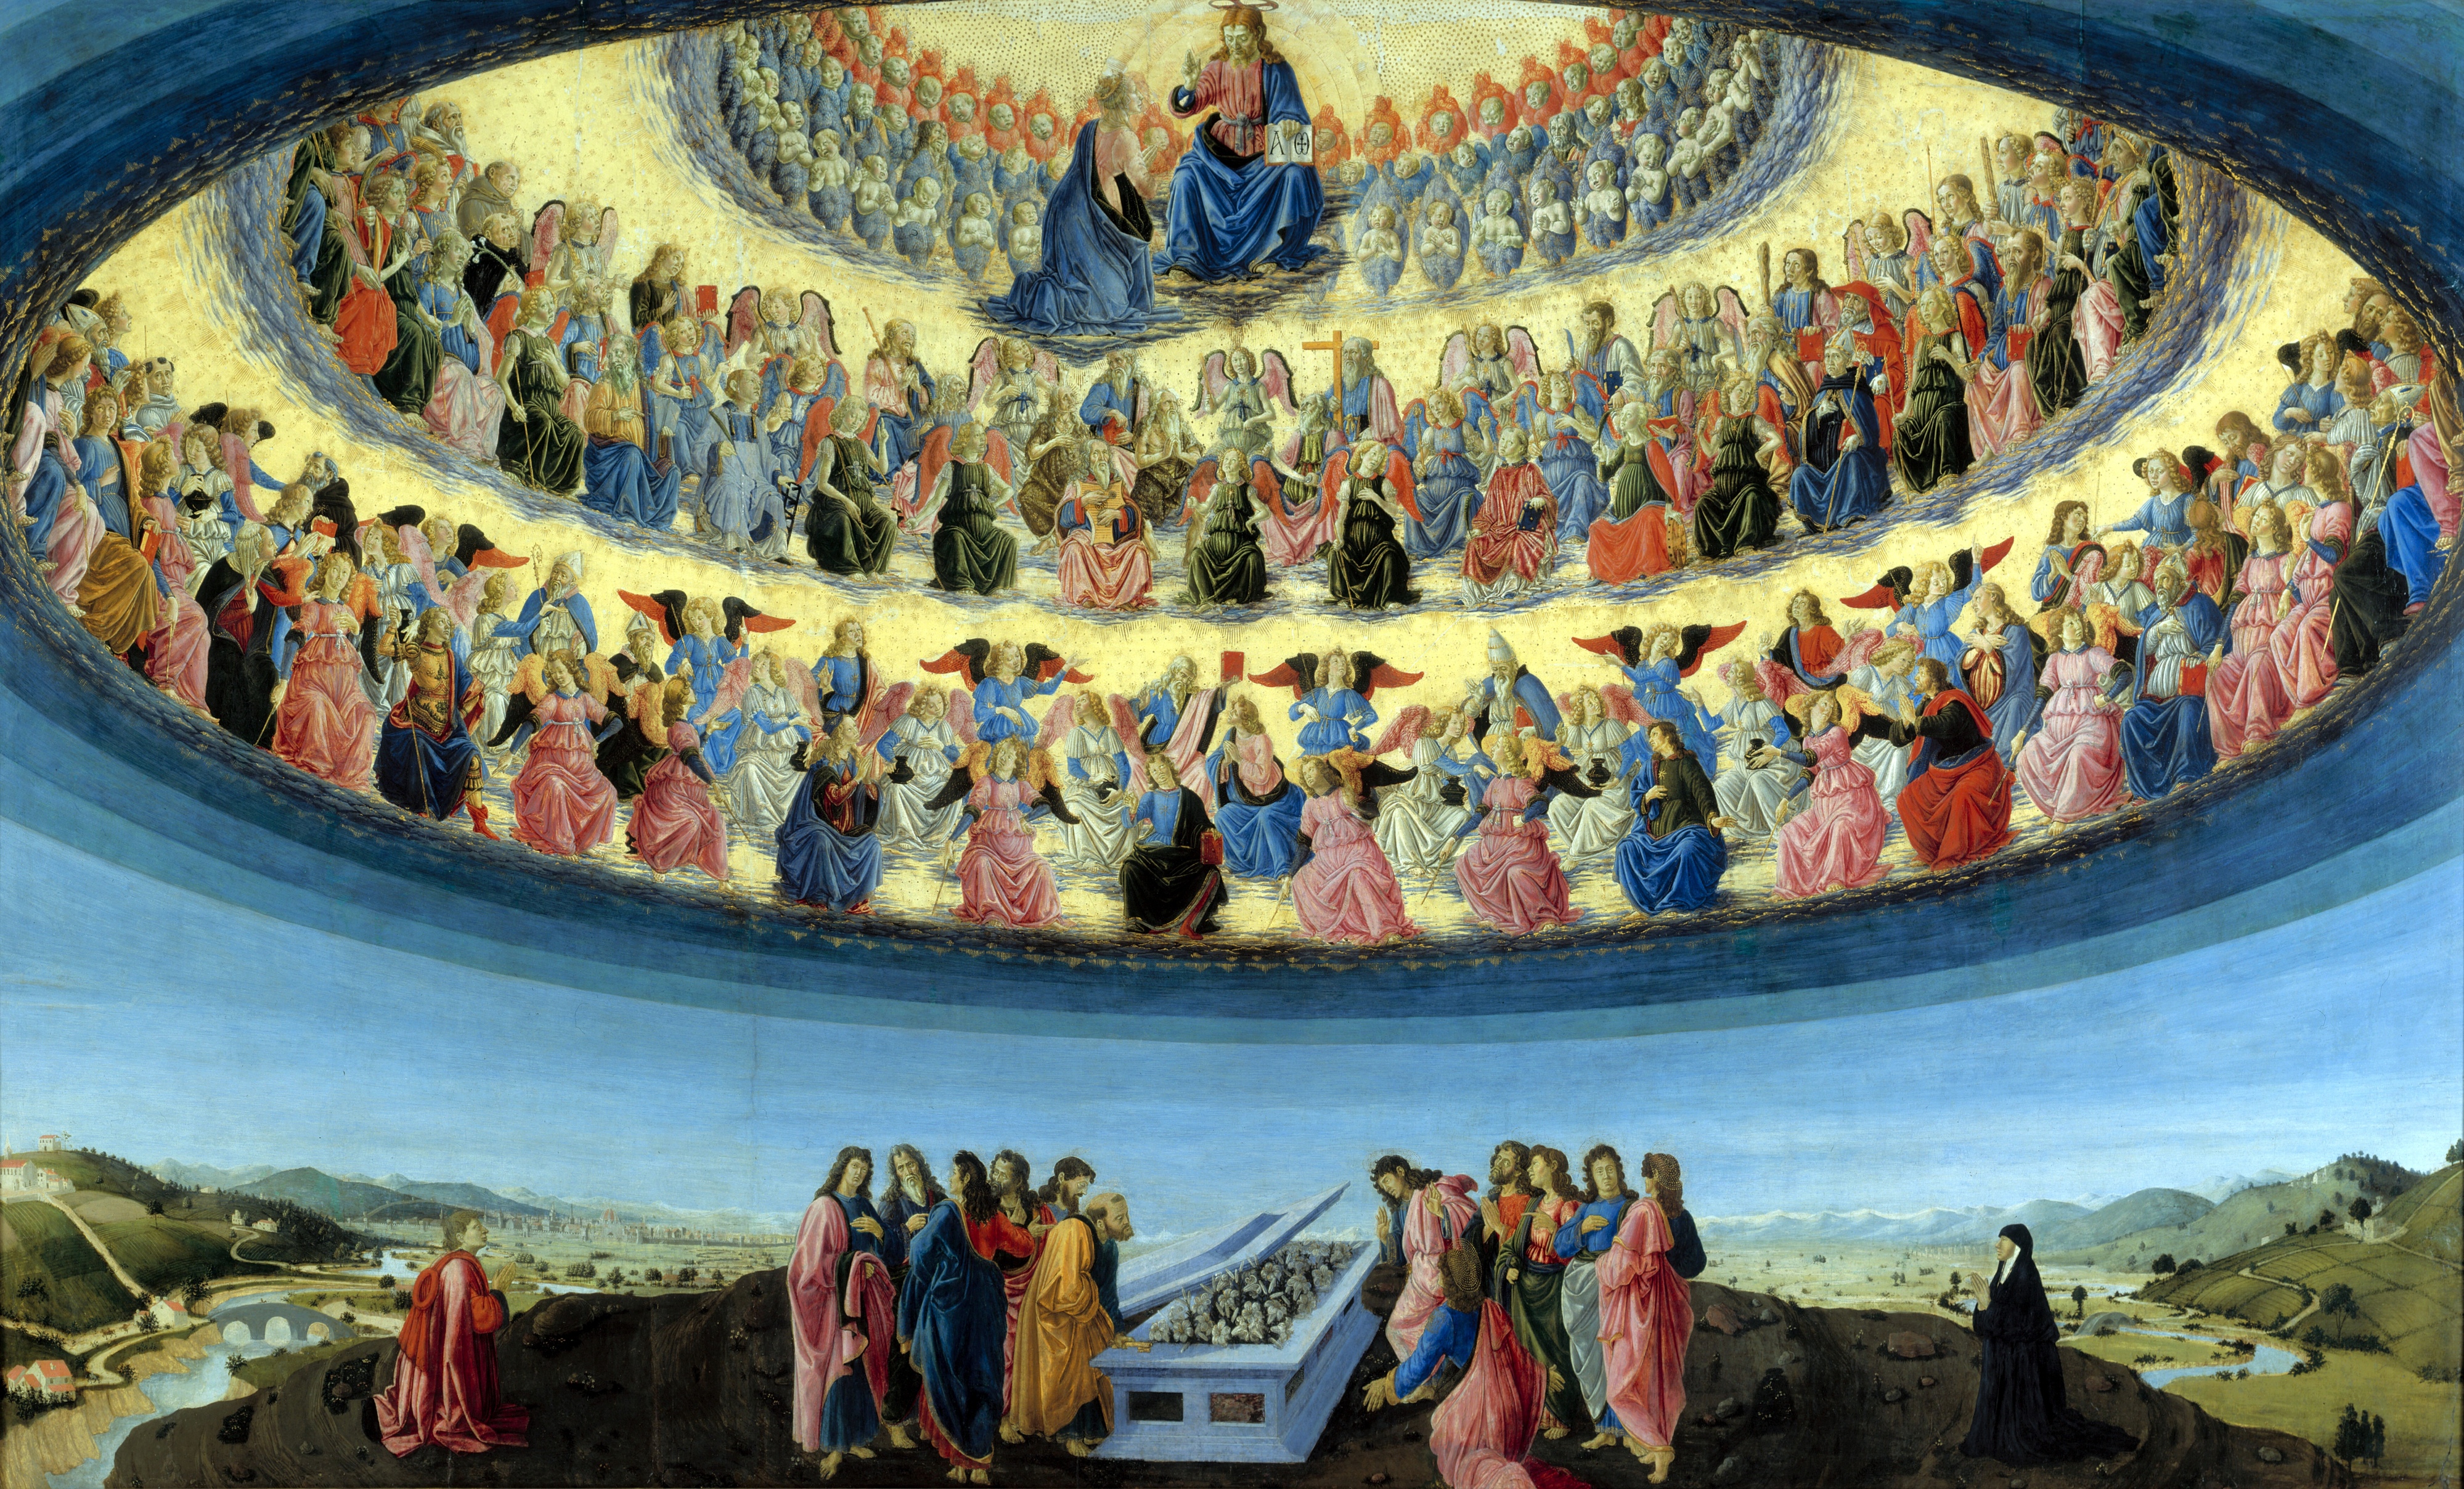 Full title: The Assumption of the Virgin Artist: Francesco Botticini Date made: probably about 1475-6